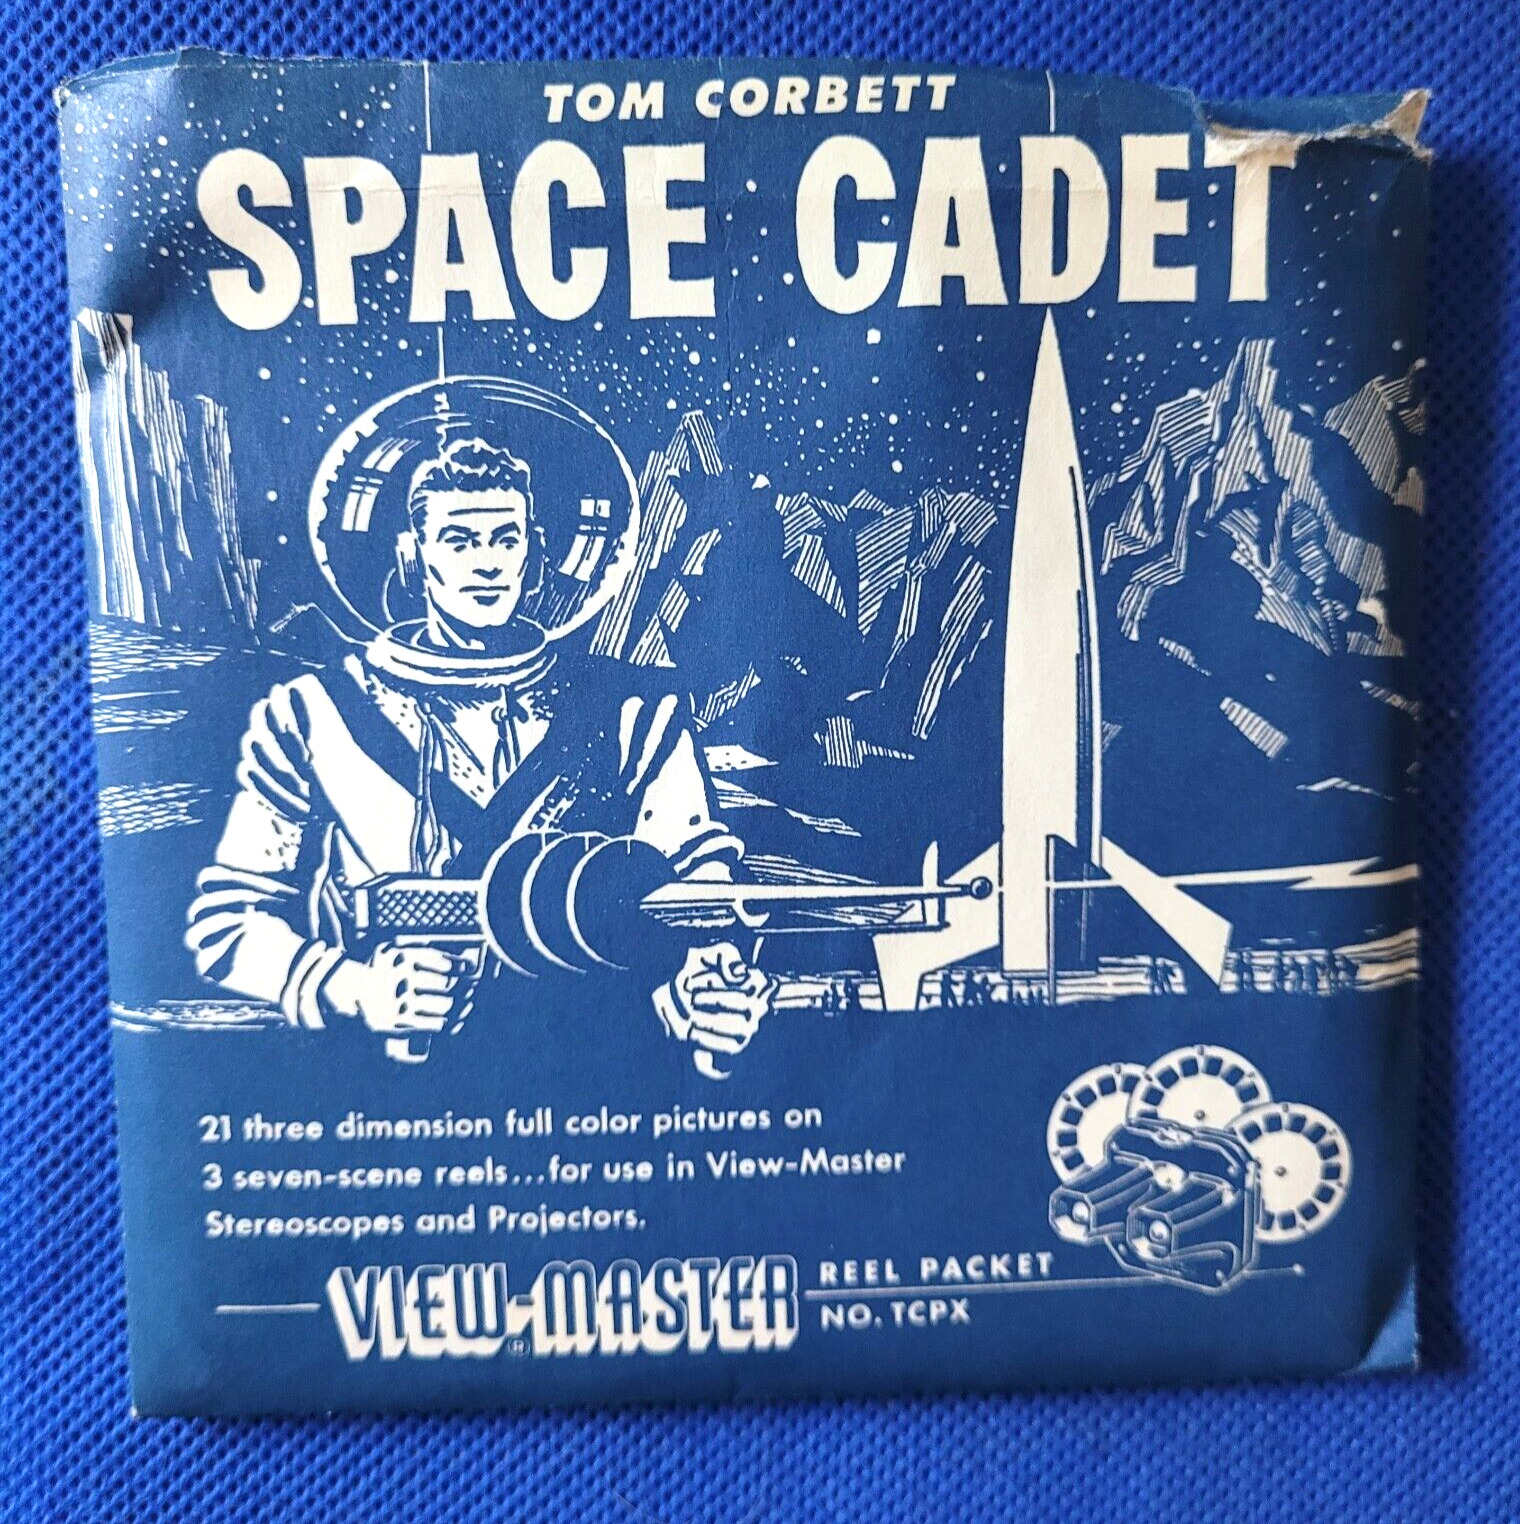 Sawyer\'s 1954 970-A B C Tom Corbett Space Cadet TCPX view-master 3 Reels Packet